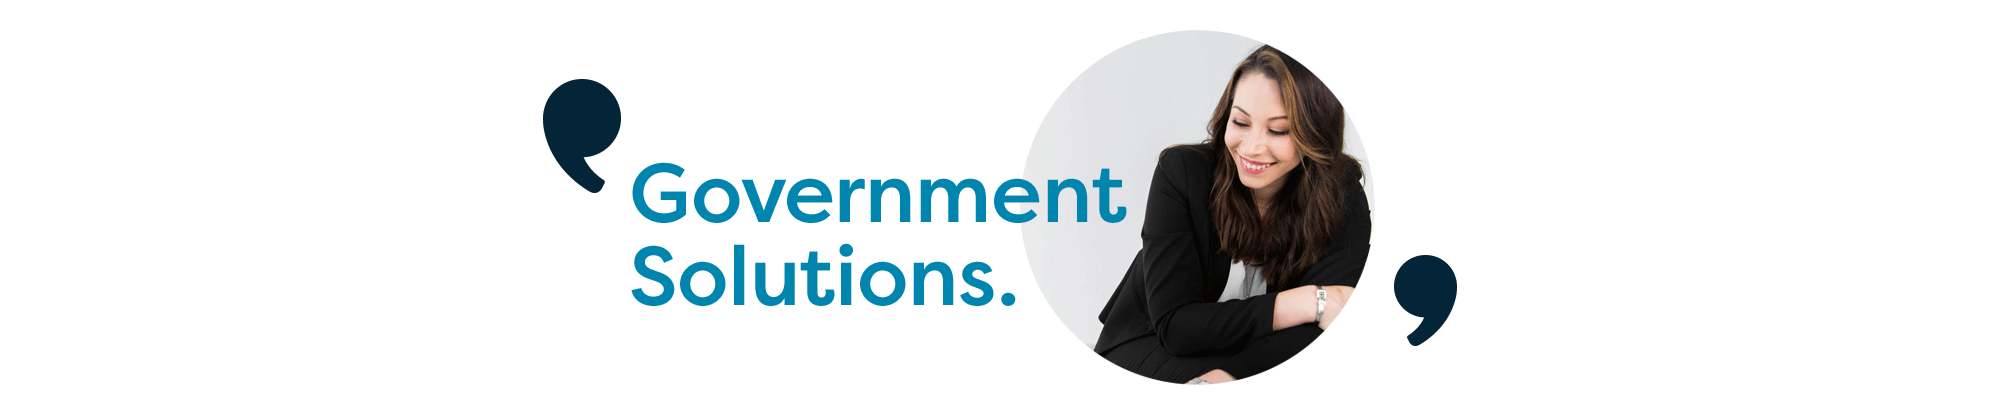 janine-marin-government-solutions-banner